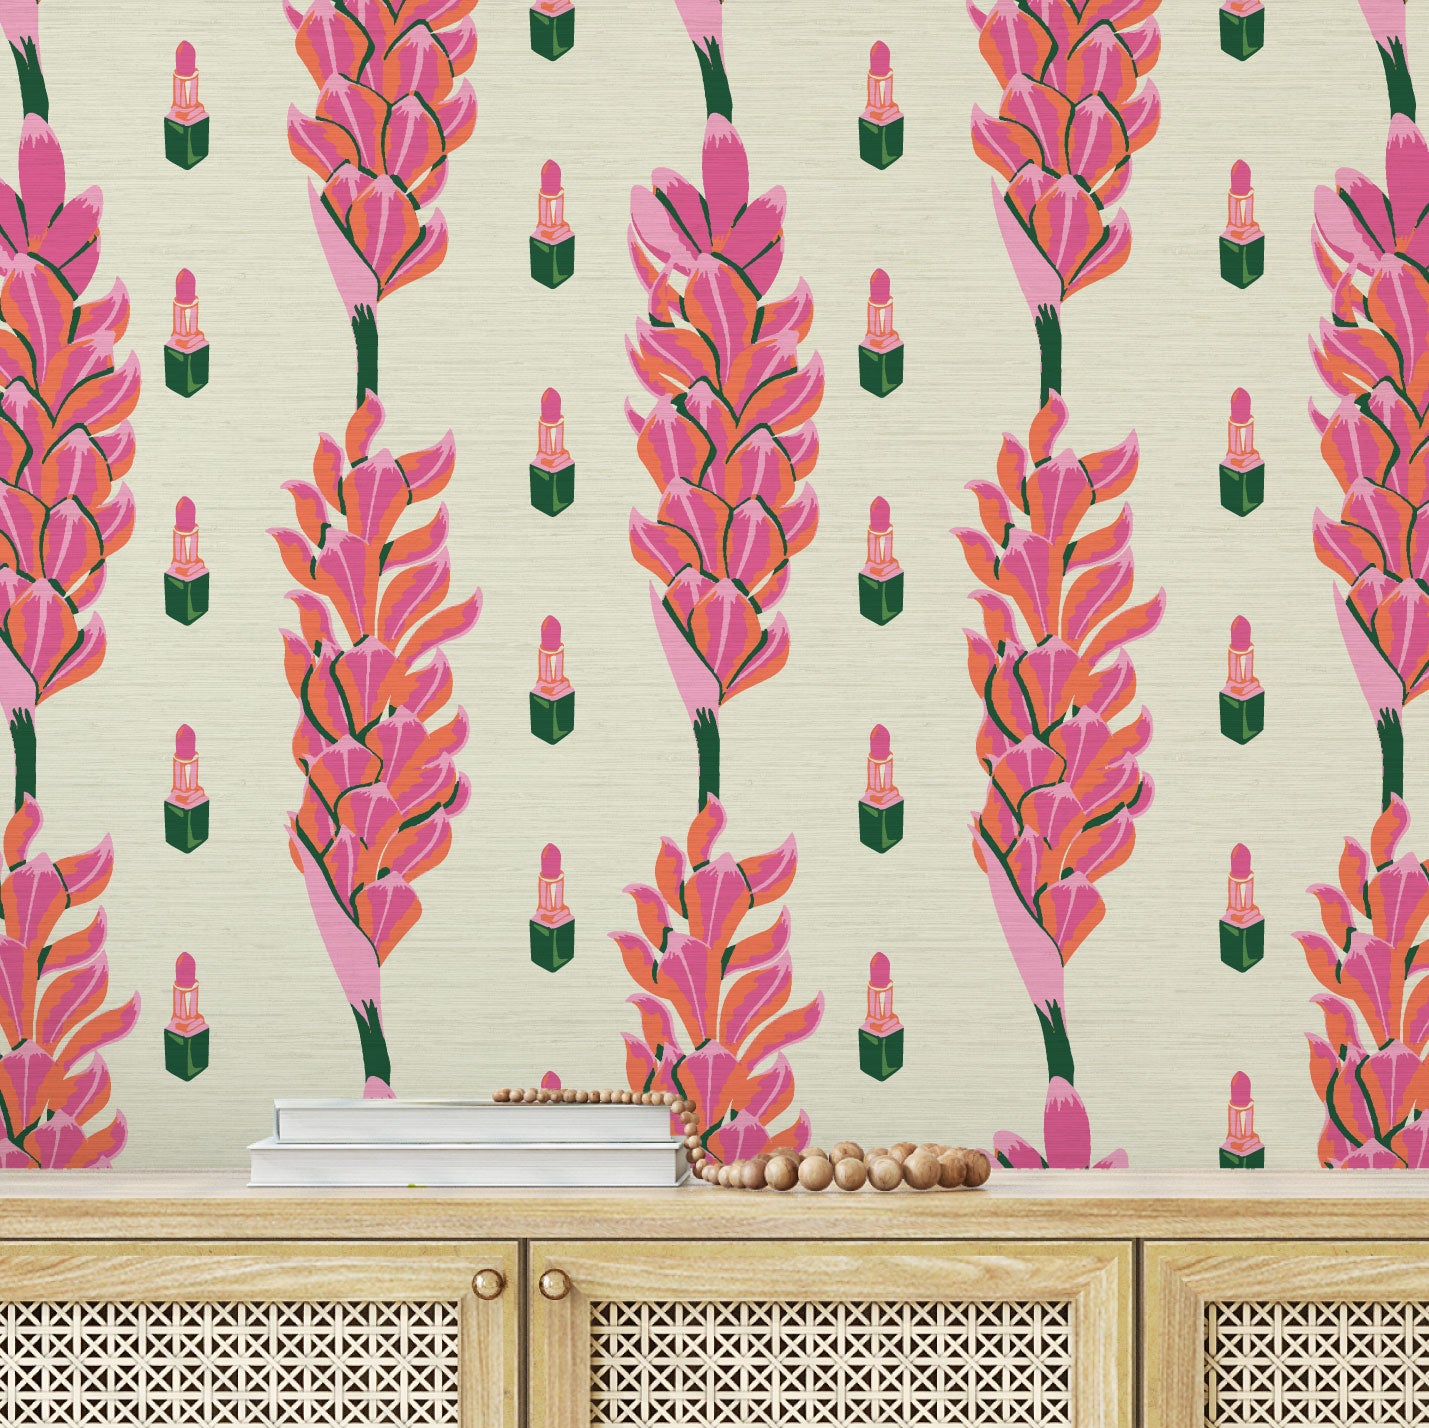 Grasscloth wallpaper Natural Textured Eco-Friendly Non-toxic High-quality  Sustainable Interior Design Bold Custom Tailor-made Retro chic Bold beauty bar salon vertical stripe botanical floral flowers lipstick makeup pink hot pain baby pink jungle tropical garden  bathroom